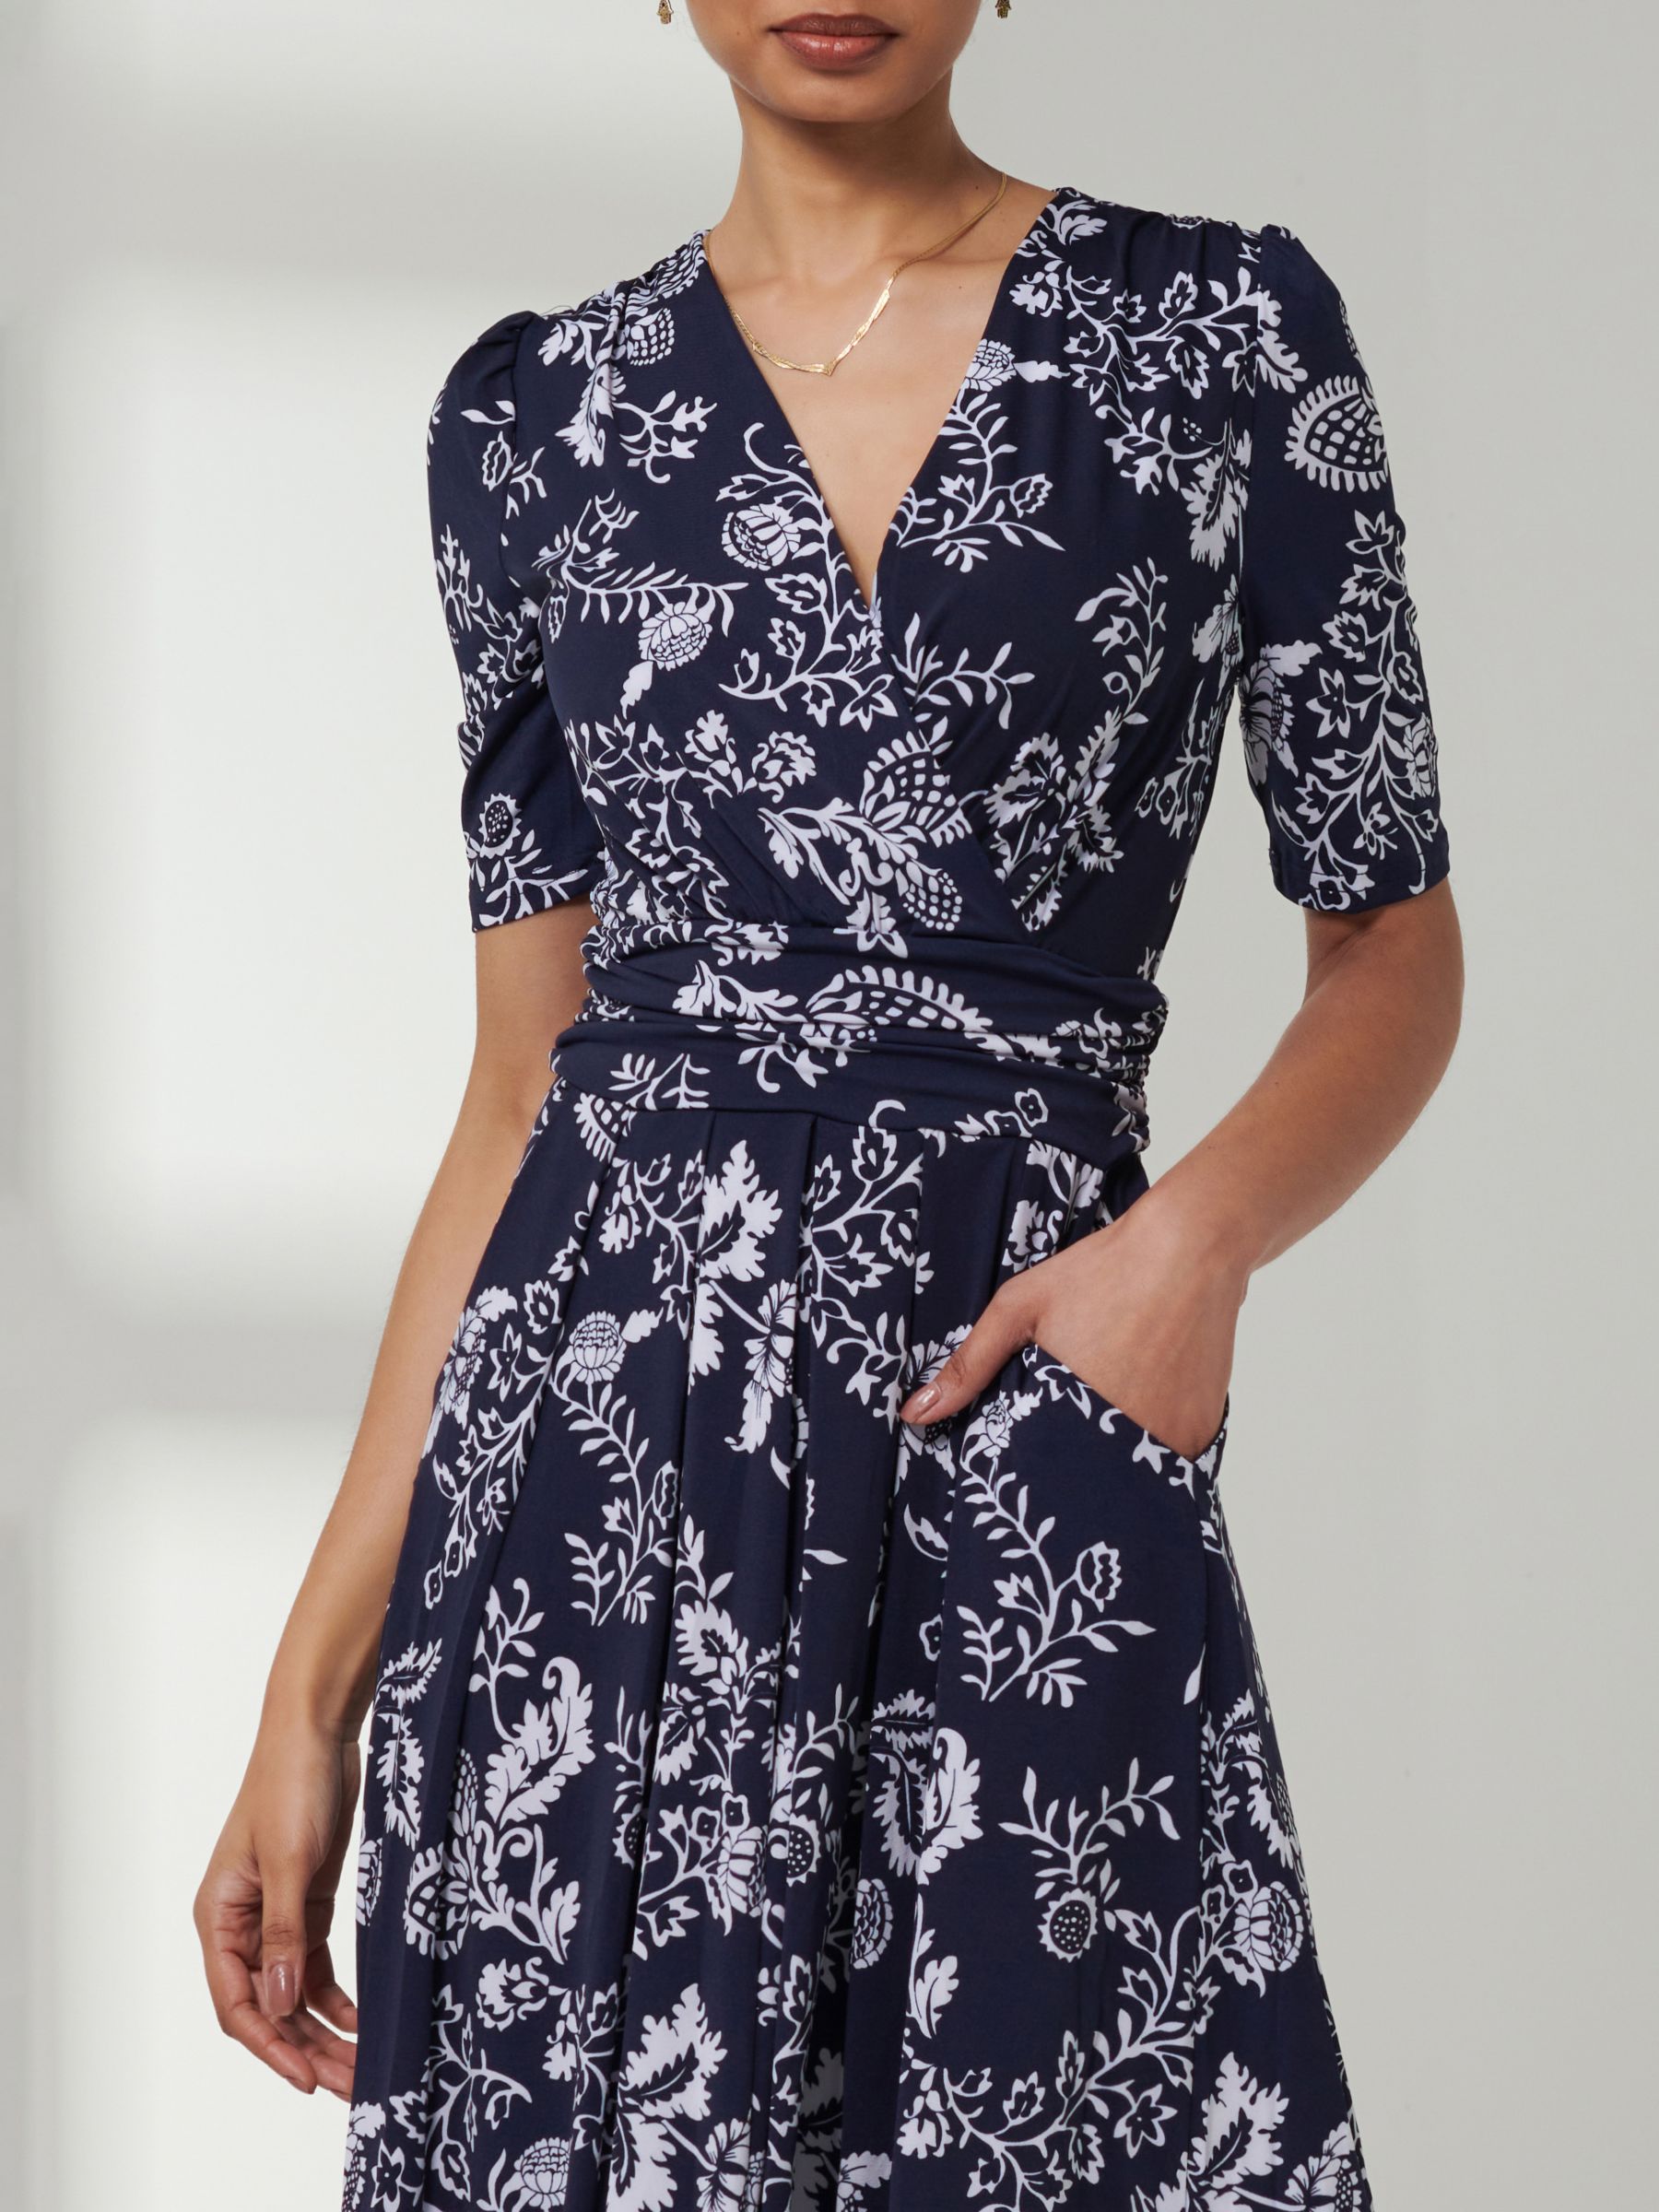 Buy Jolie Moi Pleat Floral Maxi Jersey Dress, Navy/White Online at johnlewis.com